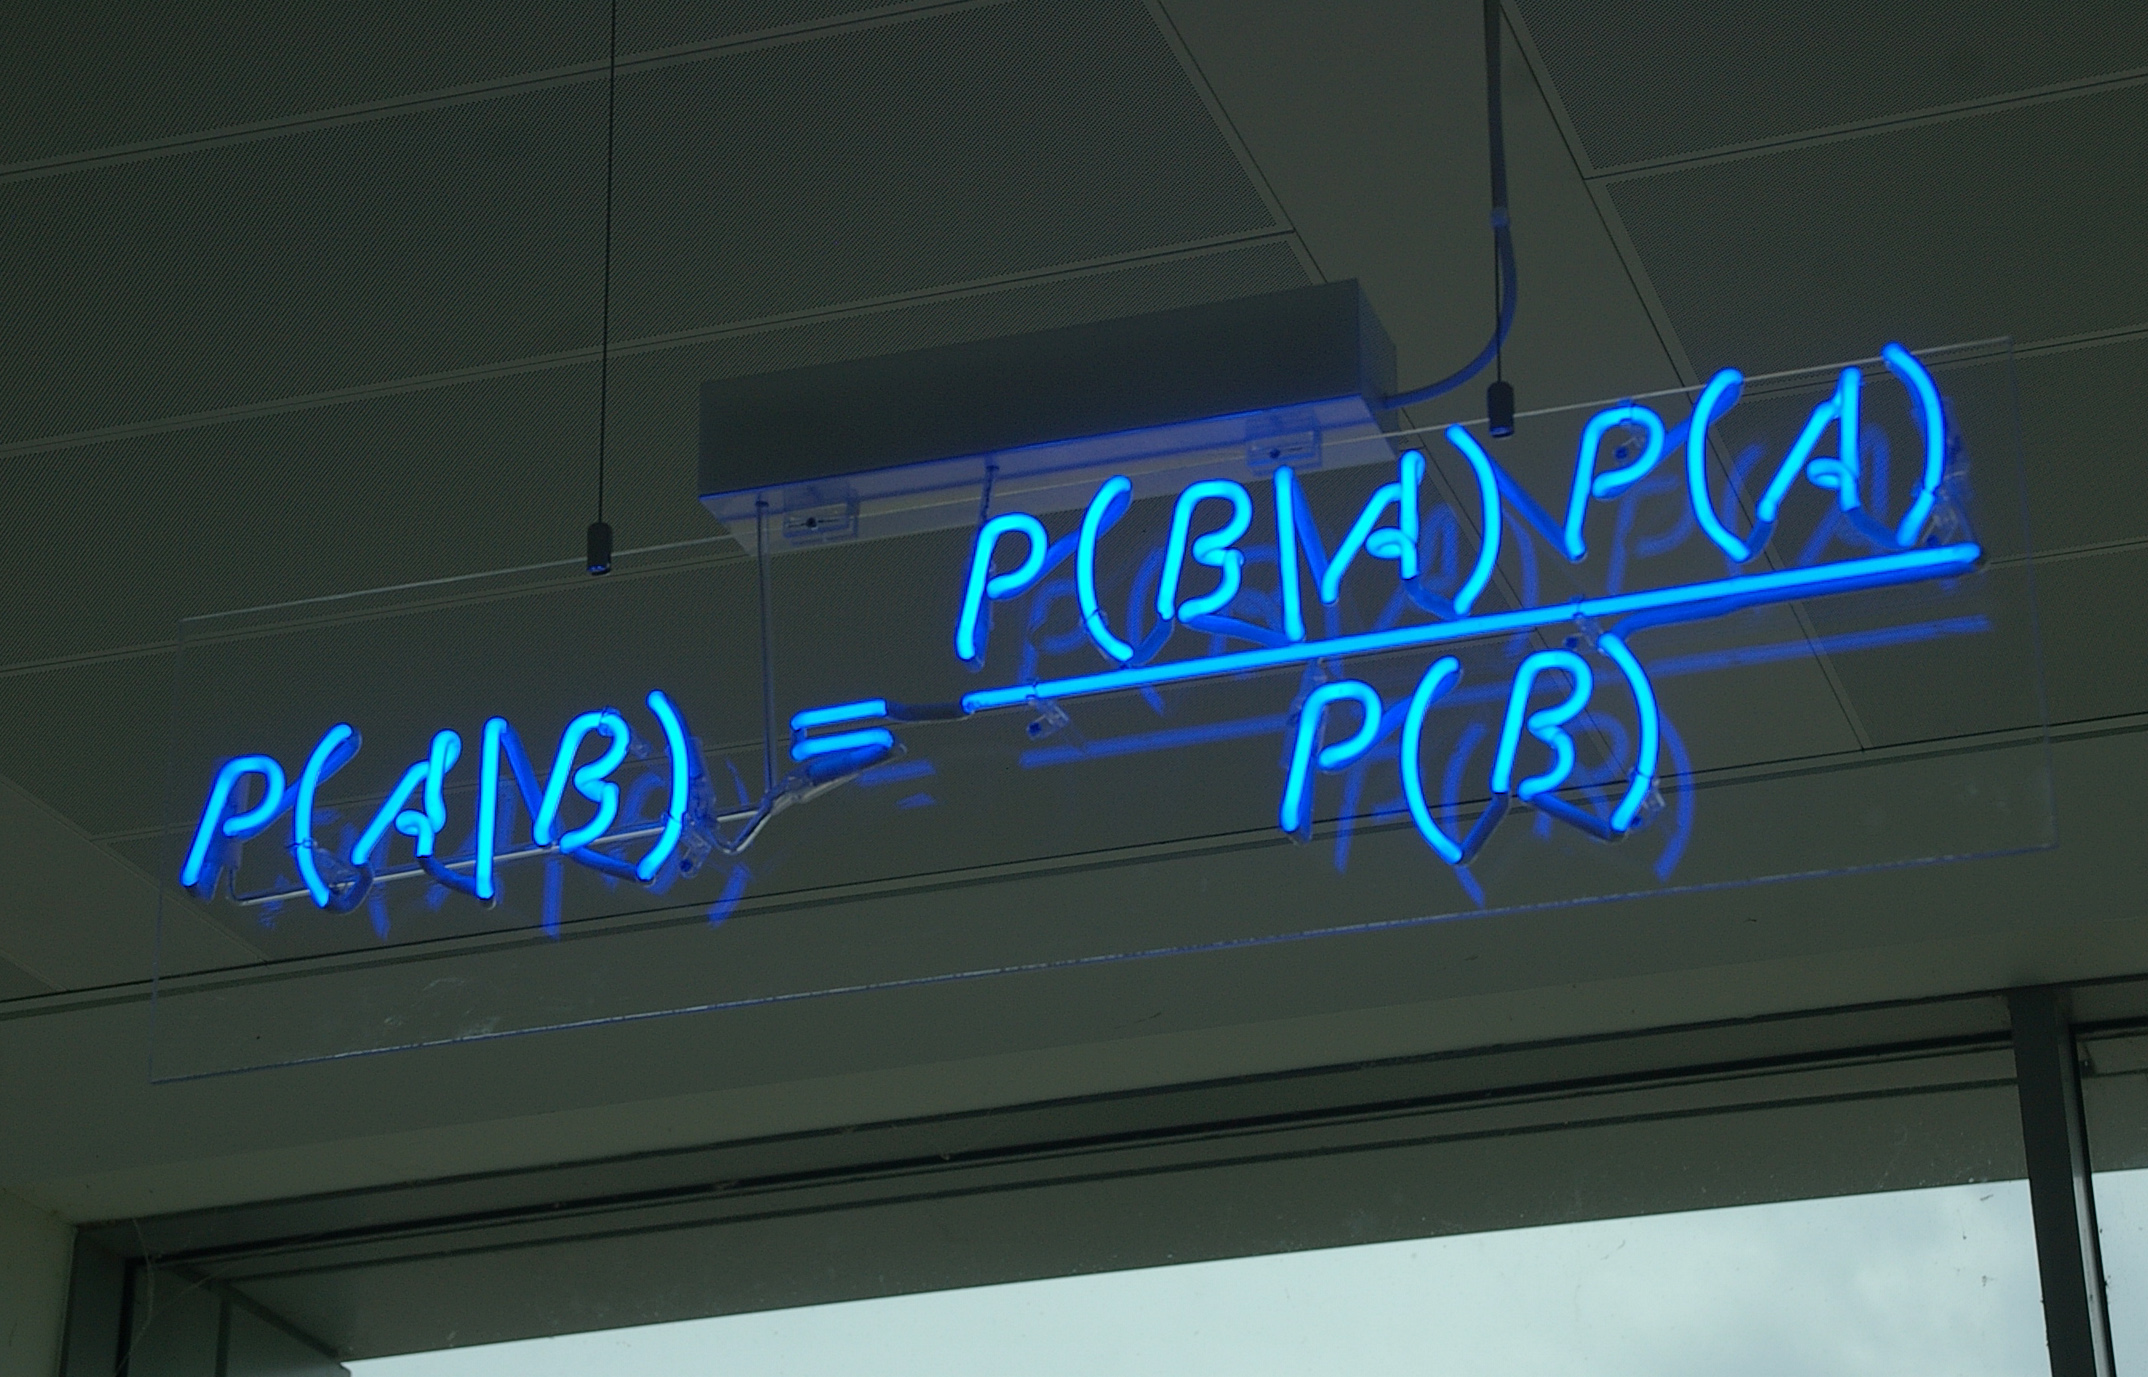 An image in neon of Bayes' theorem